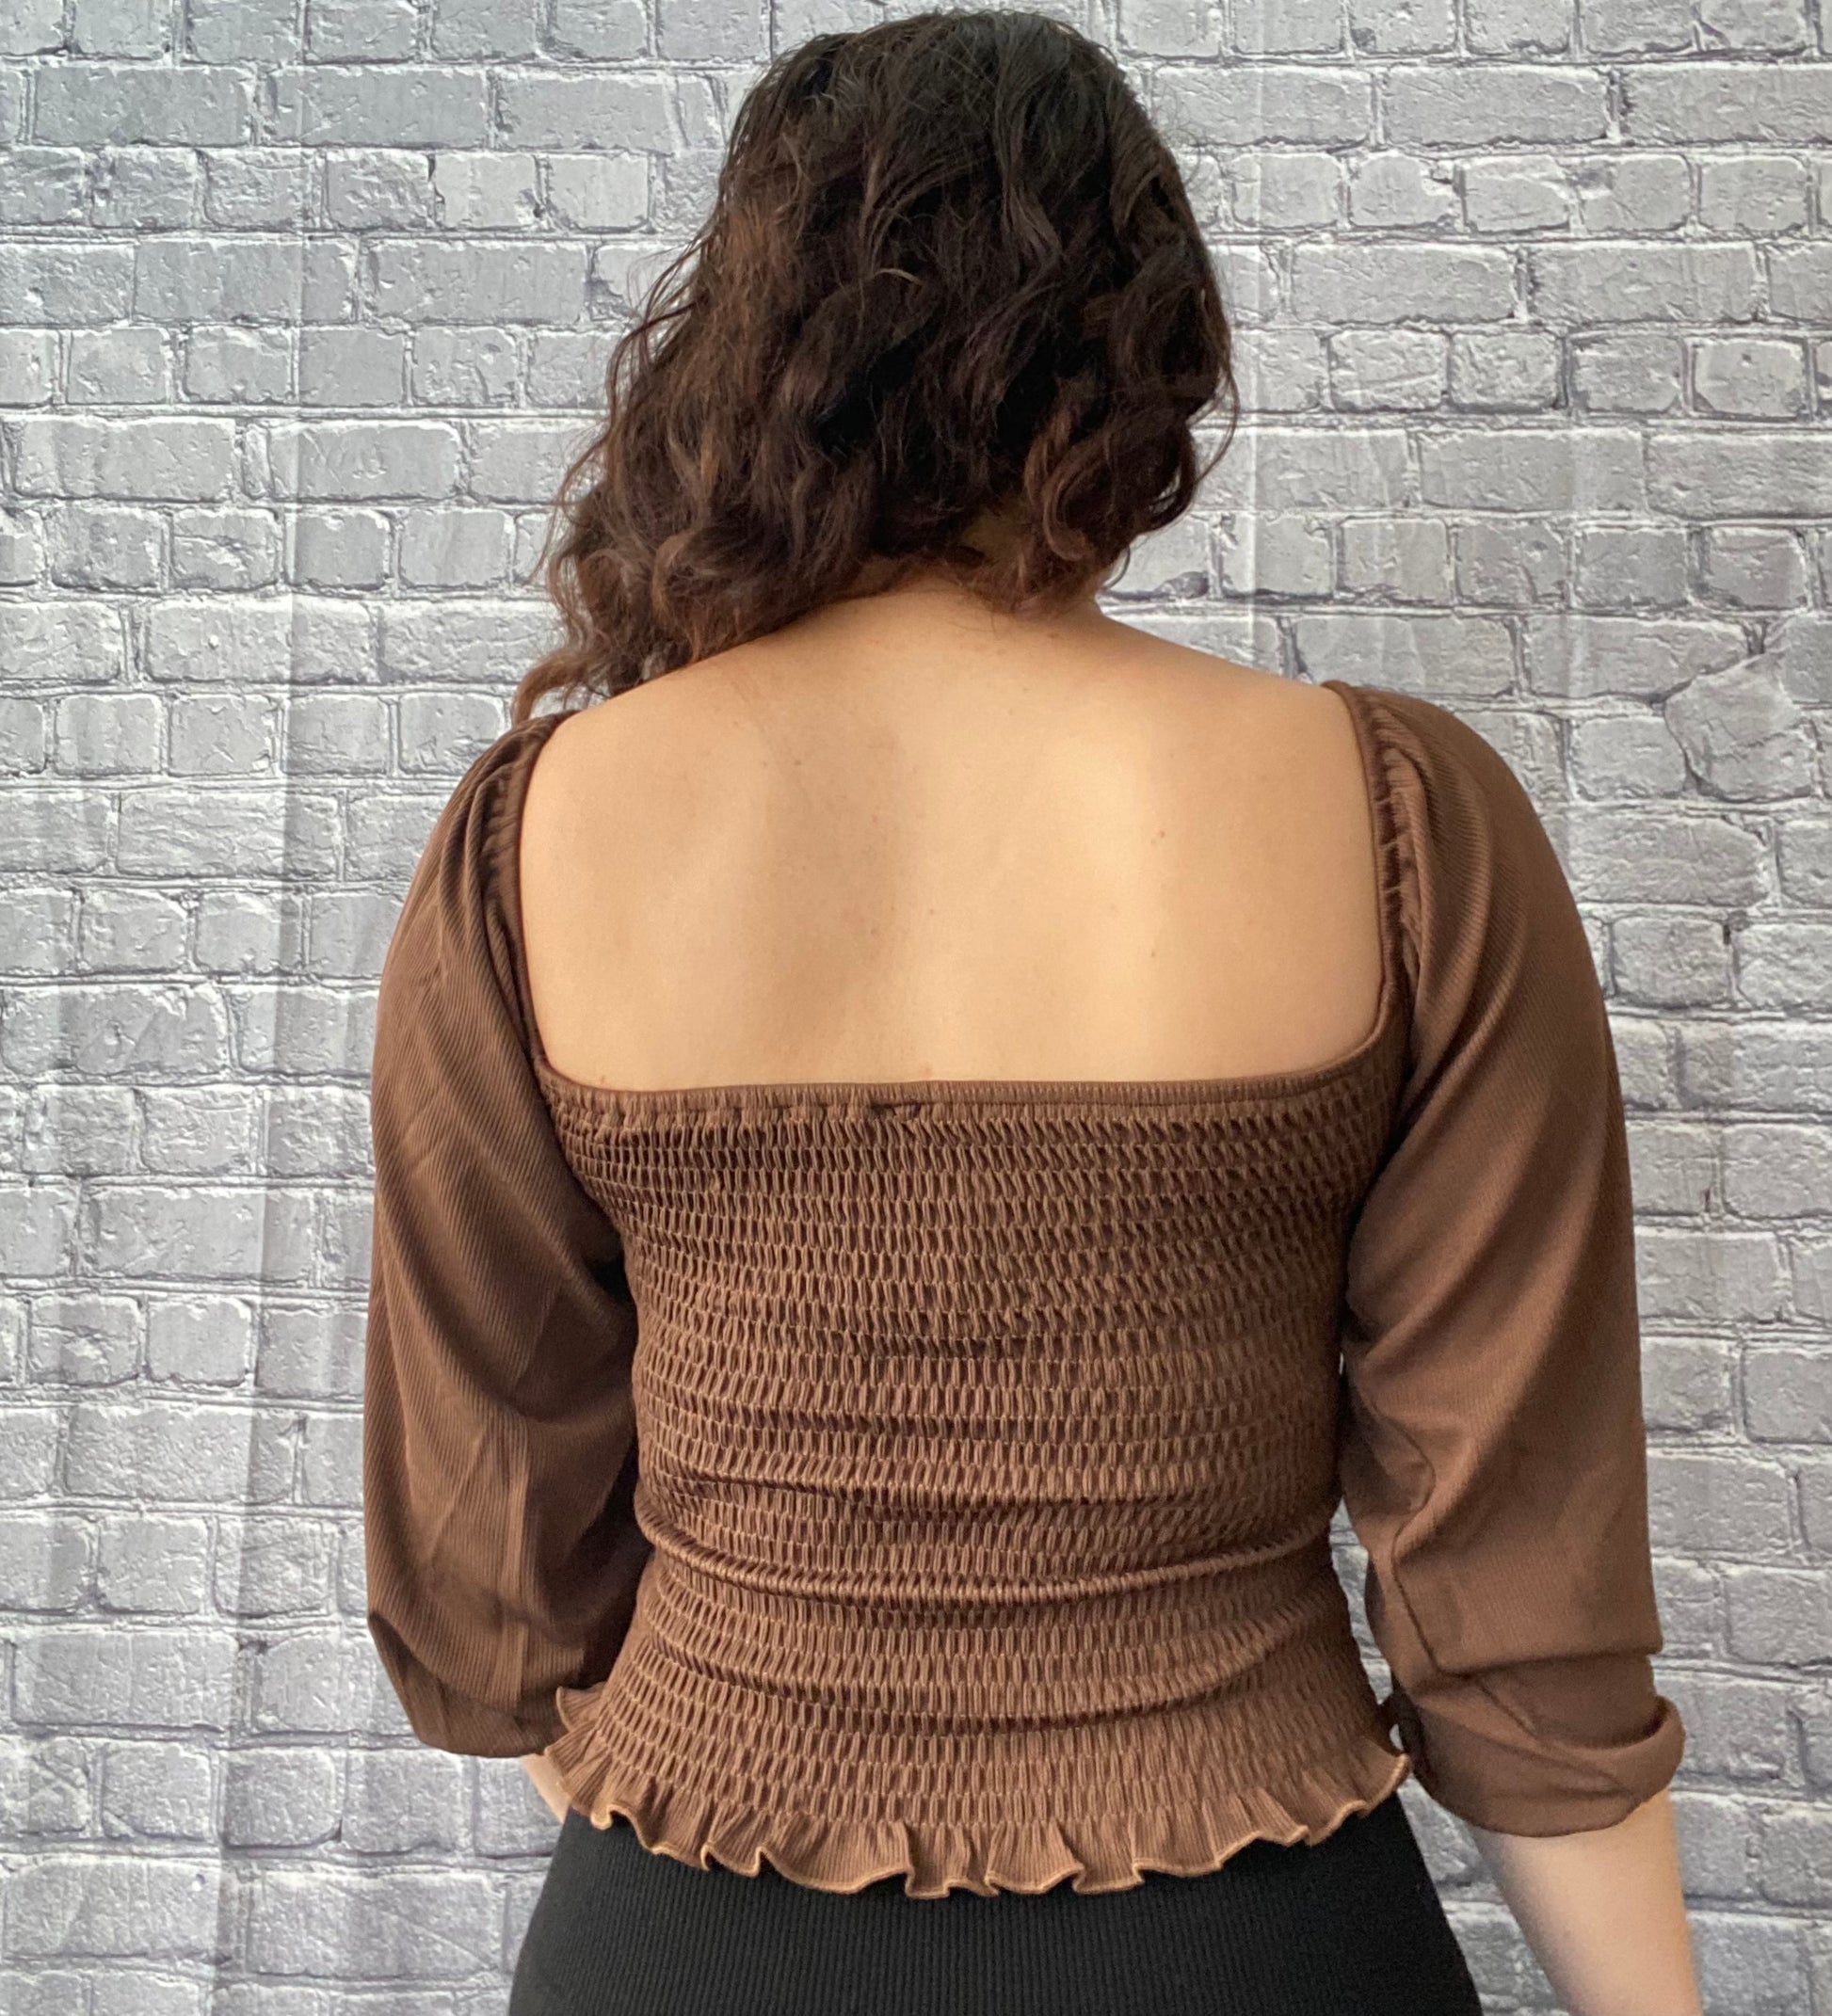  brown ballon sleeve blouse with ruched detail on torso